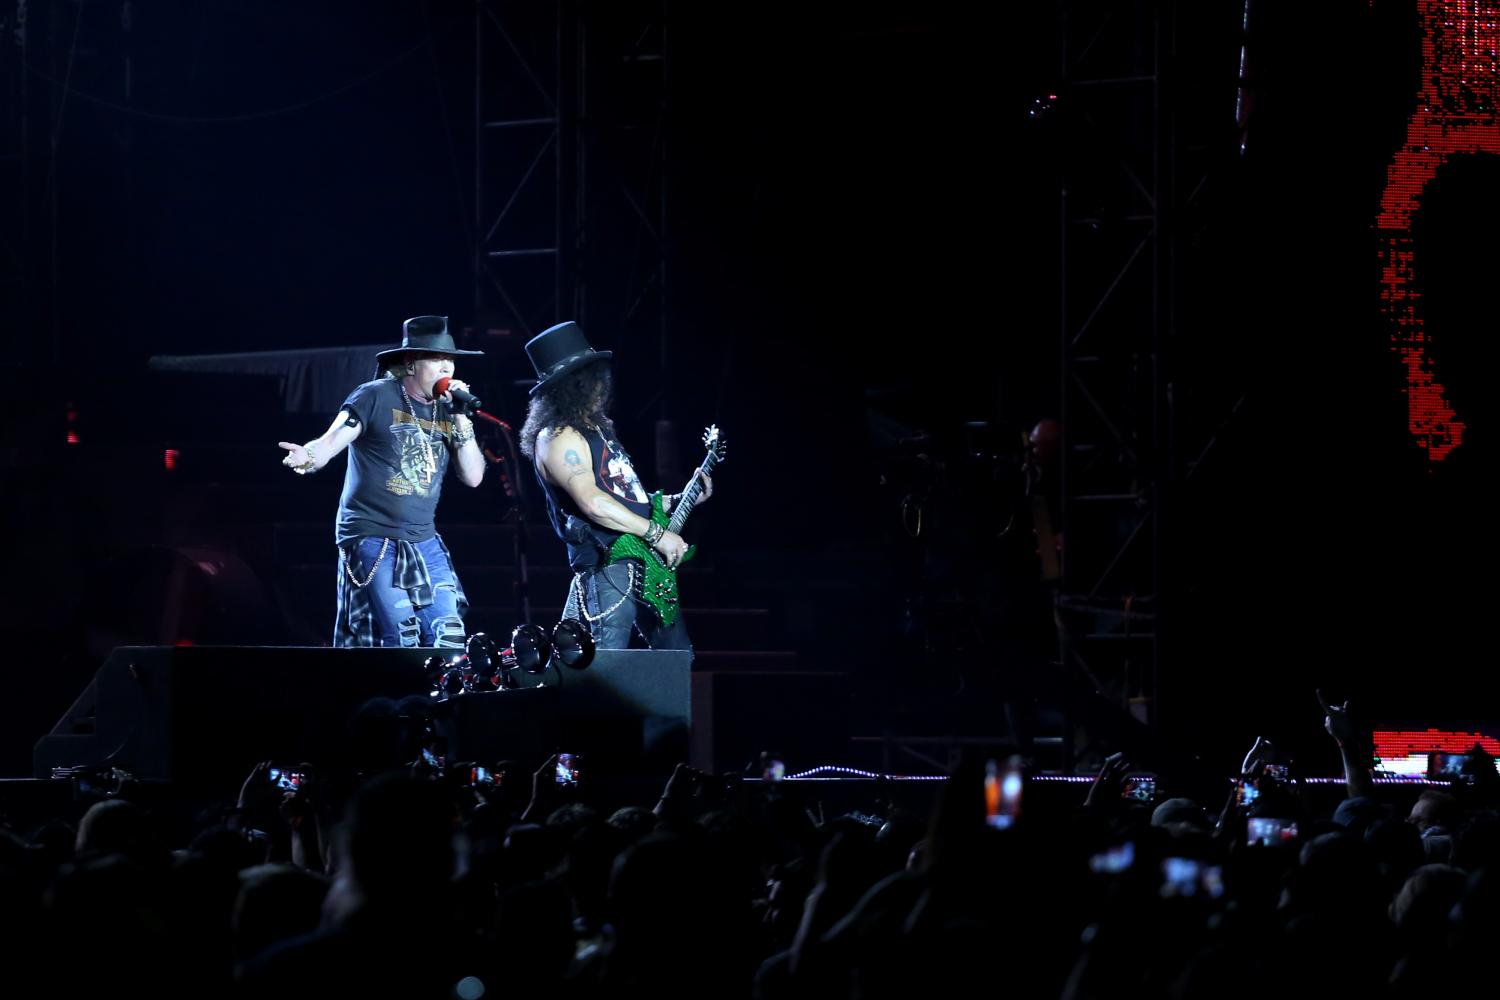 Guns N' Roses played at the Sun Bowl on Wednesday, Sept. 6, for their 